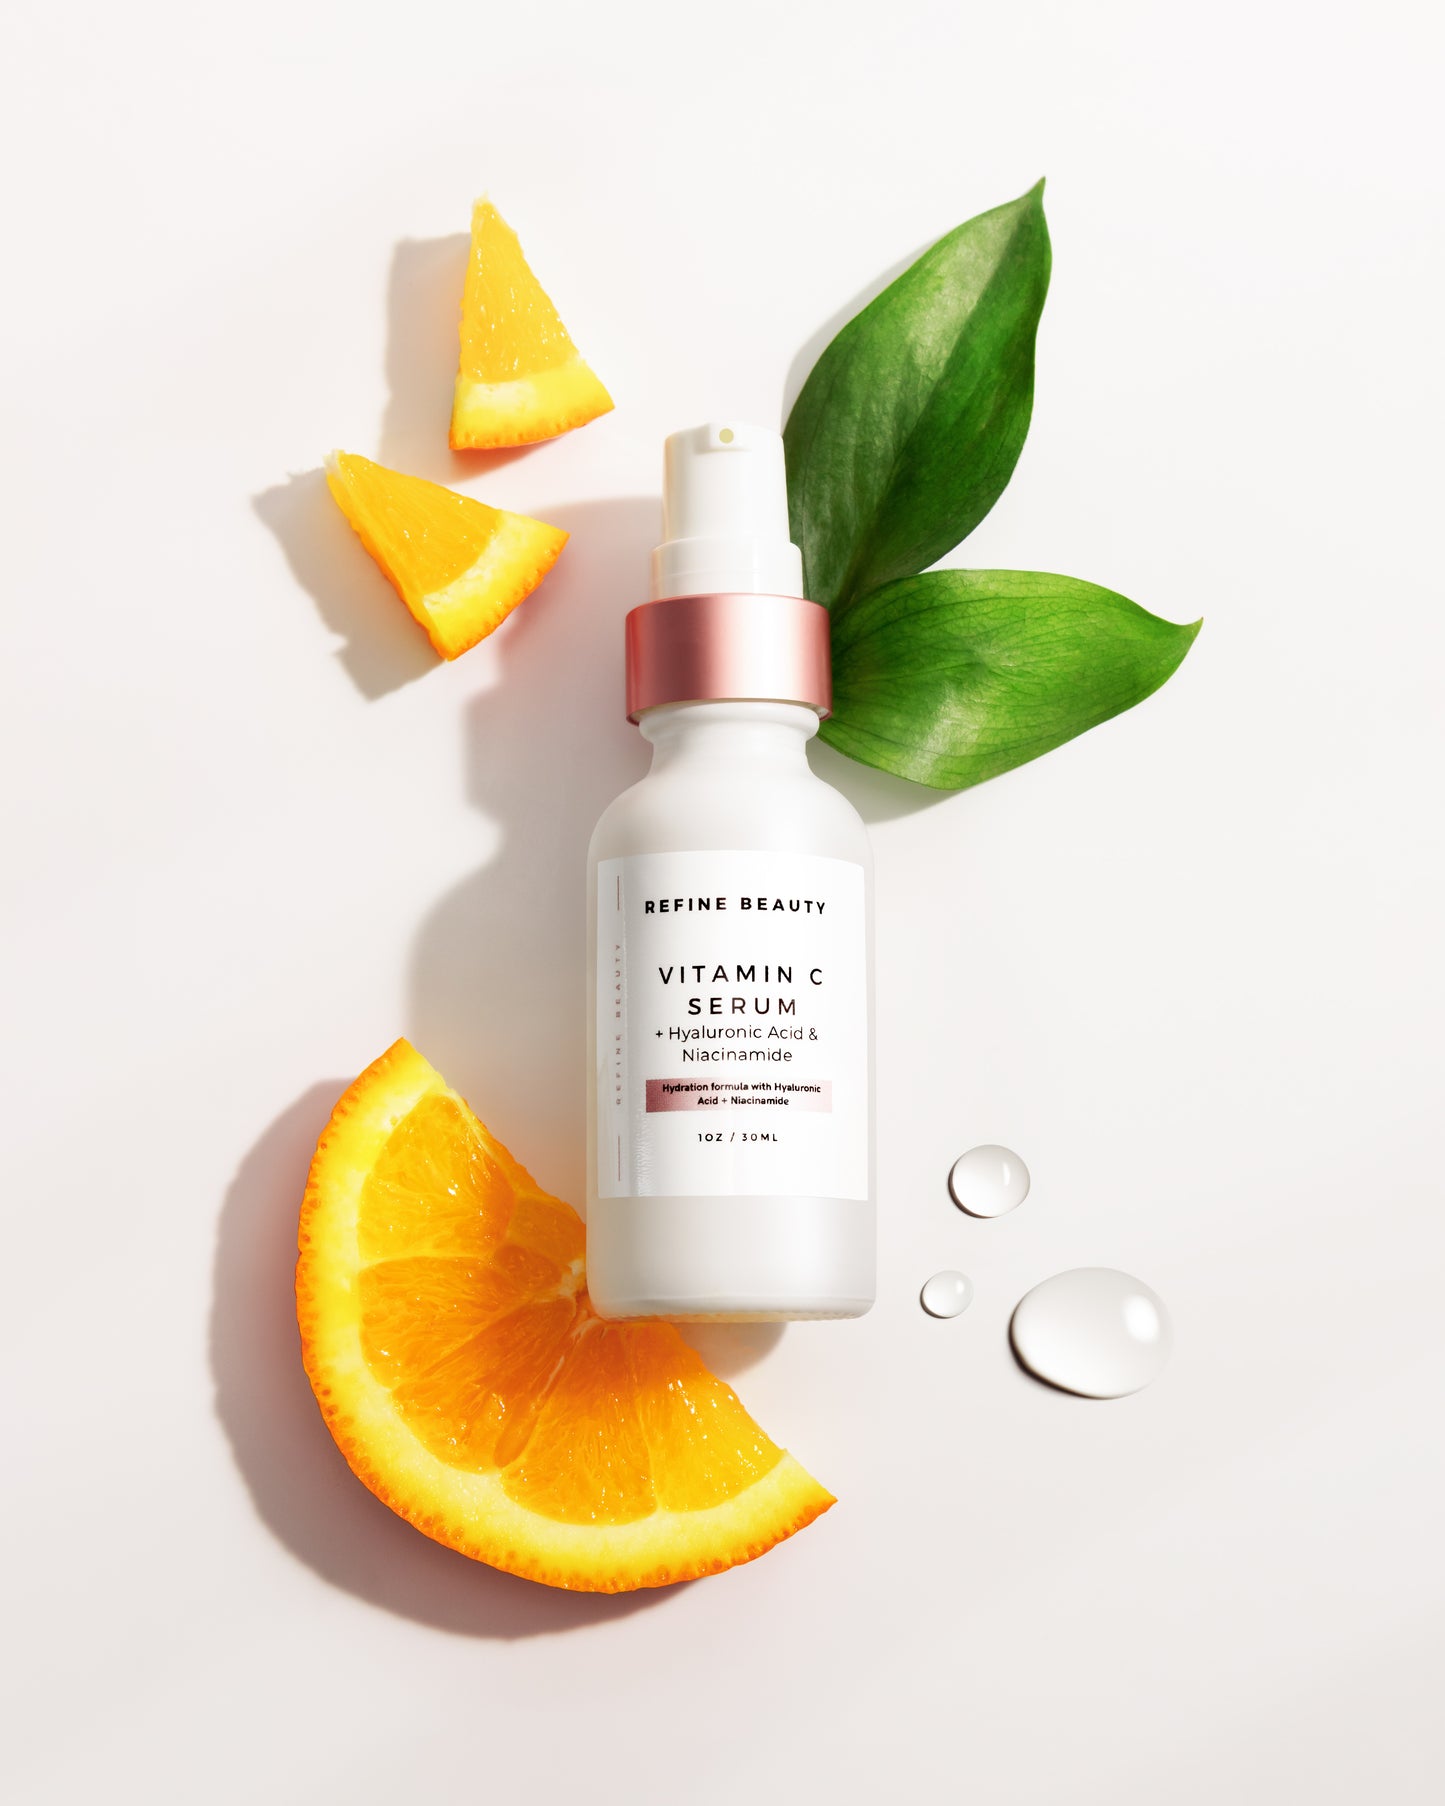 Vitamin C Serum with Hyaluronic Acid + Niacinamide for fine lines and wrinkles, acne, hyperpigmentation for an improved appearance and texture 